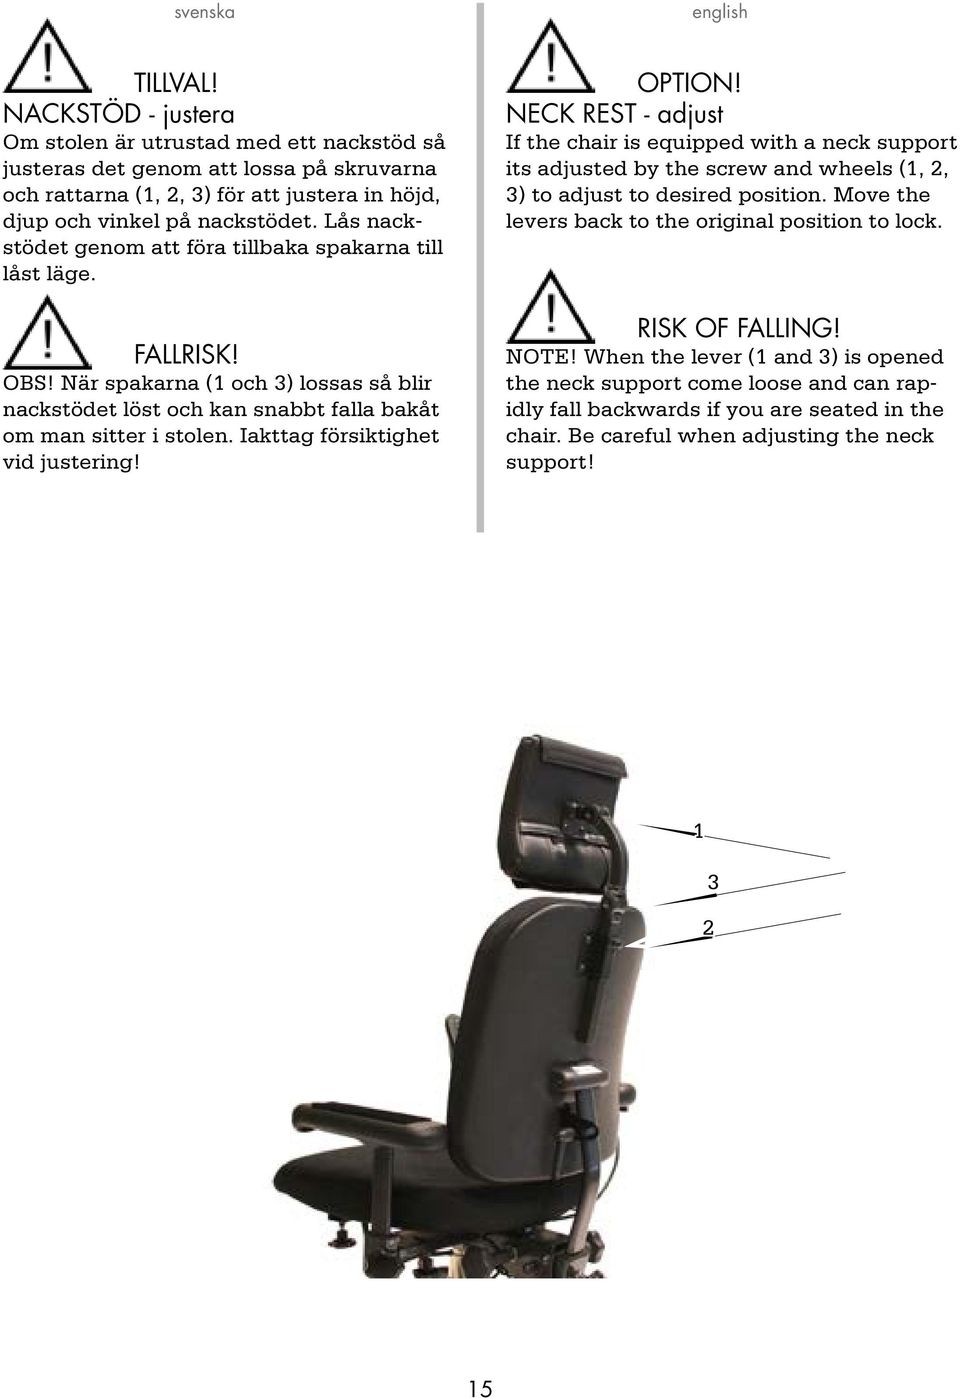 Iakttag försiktighet vid justering! Option! neck rest - adjust If the chair is equipped with a neck support its adjusted by the screw and wheels (,, ) to adjust to desired position.